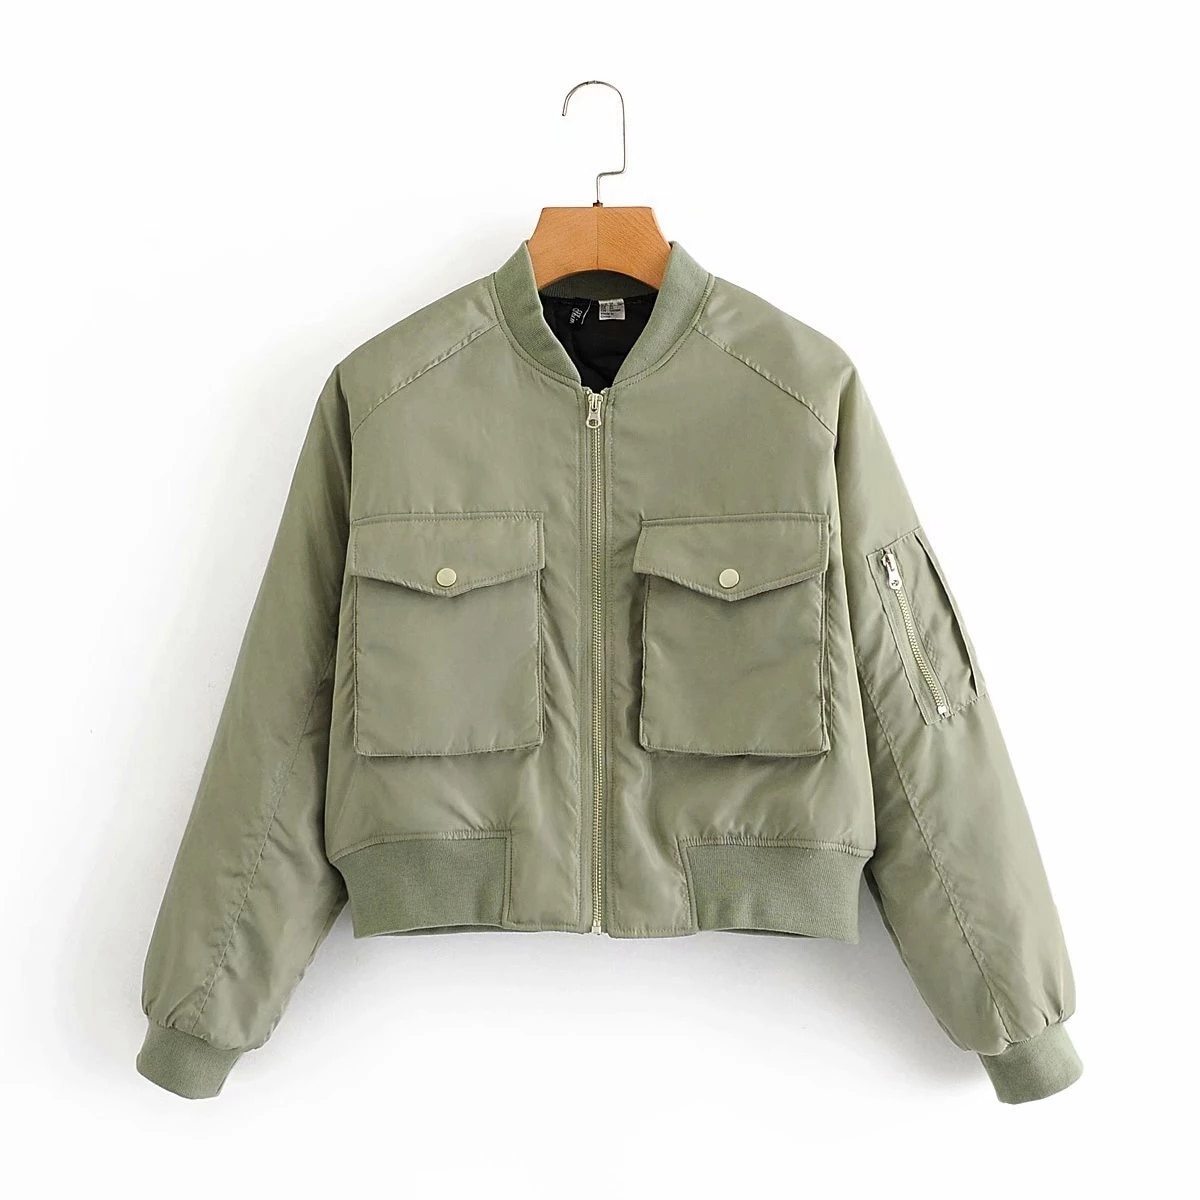 Chaqueta verde militar mujer outfit